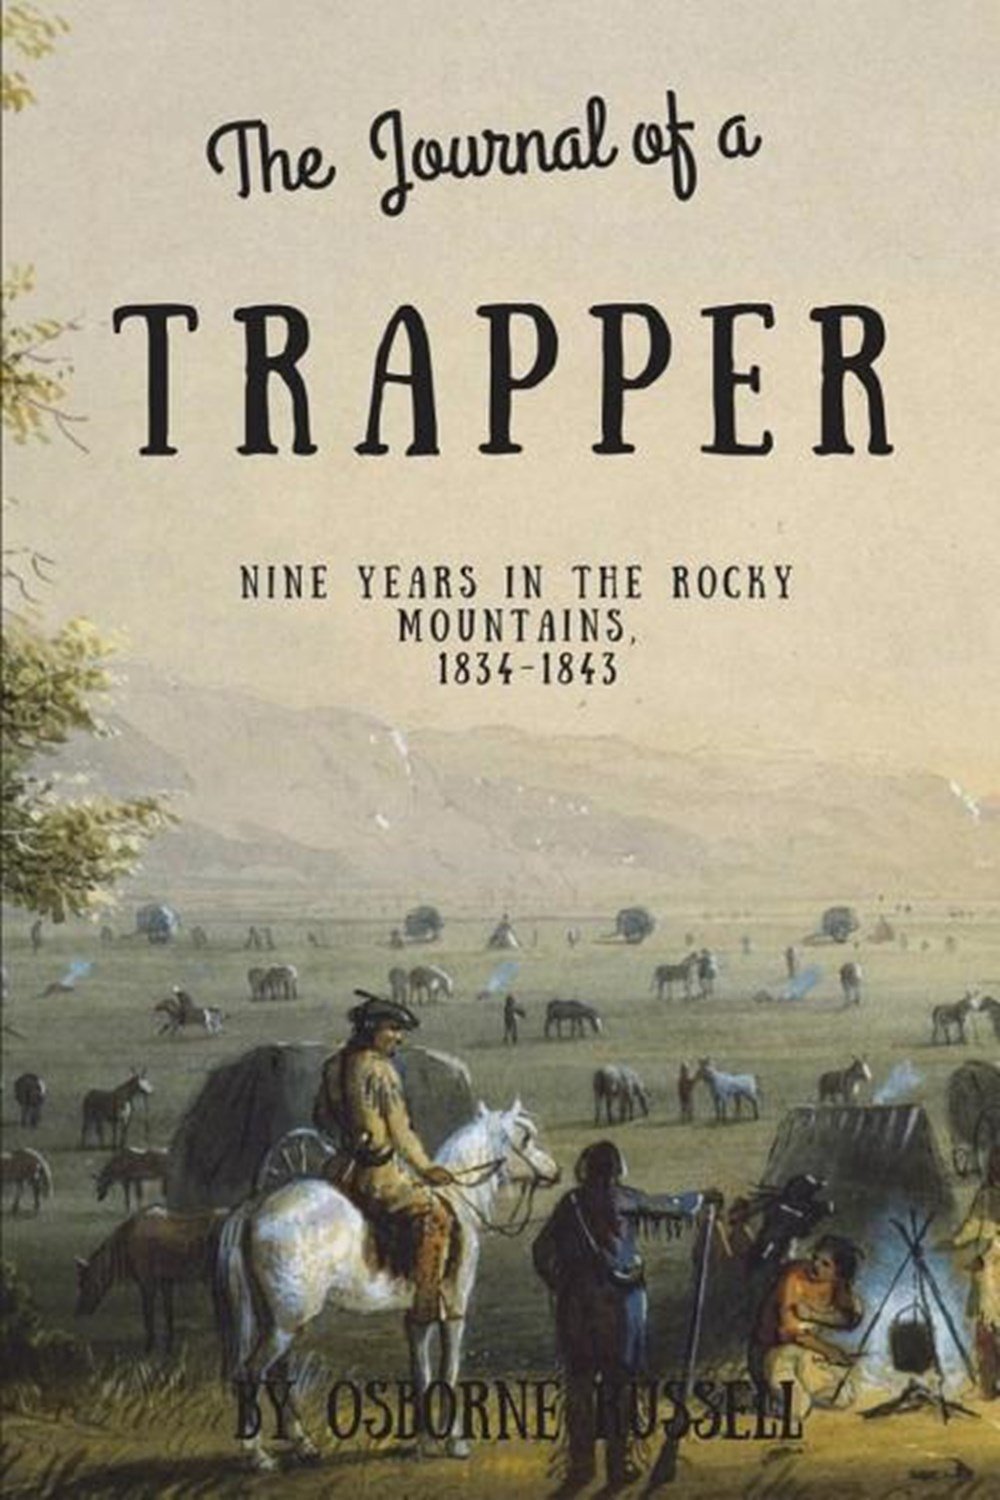 Journal of a Trapper (Illustrated) Nine Years in the Rocky Mountains, 1834-1843